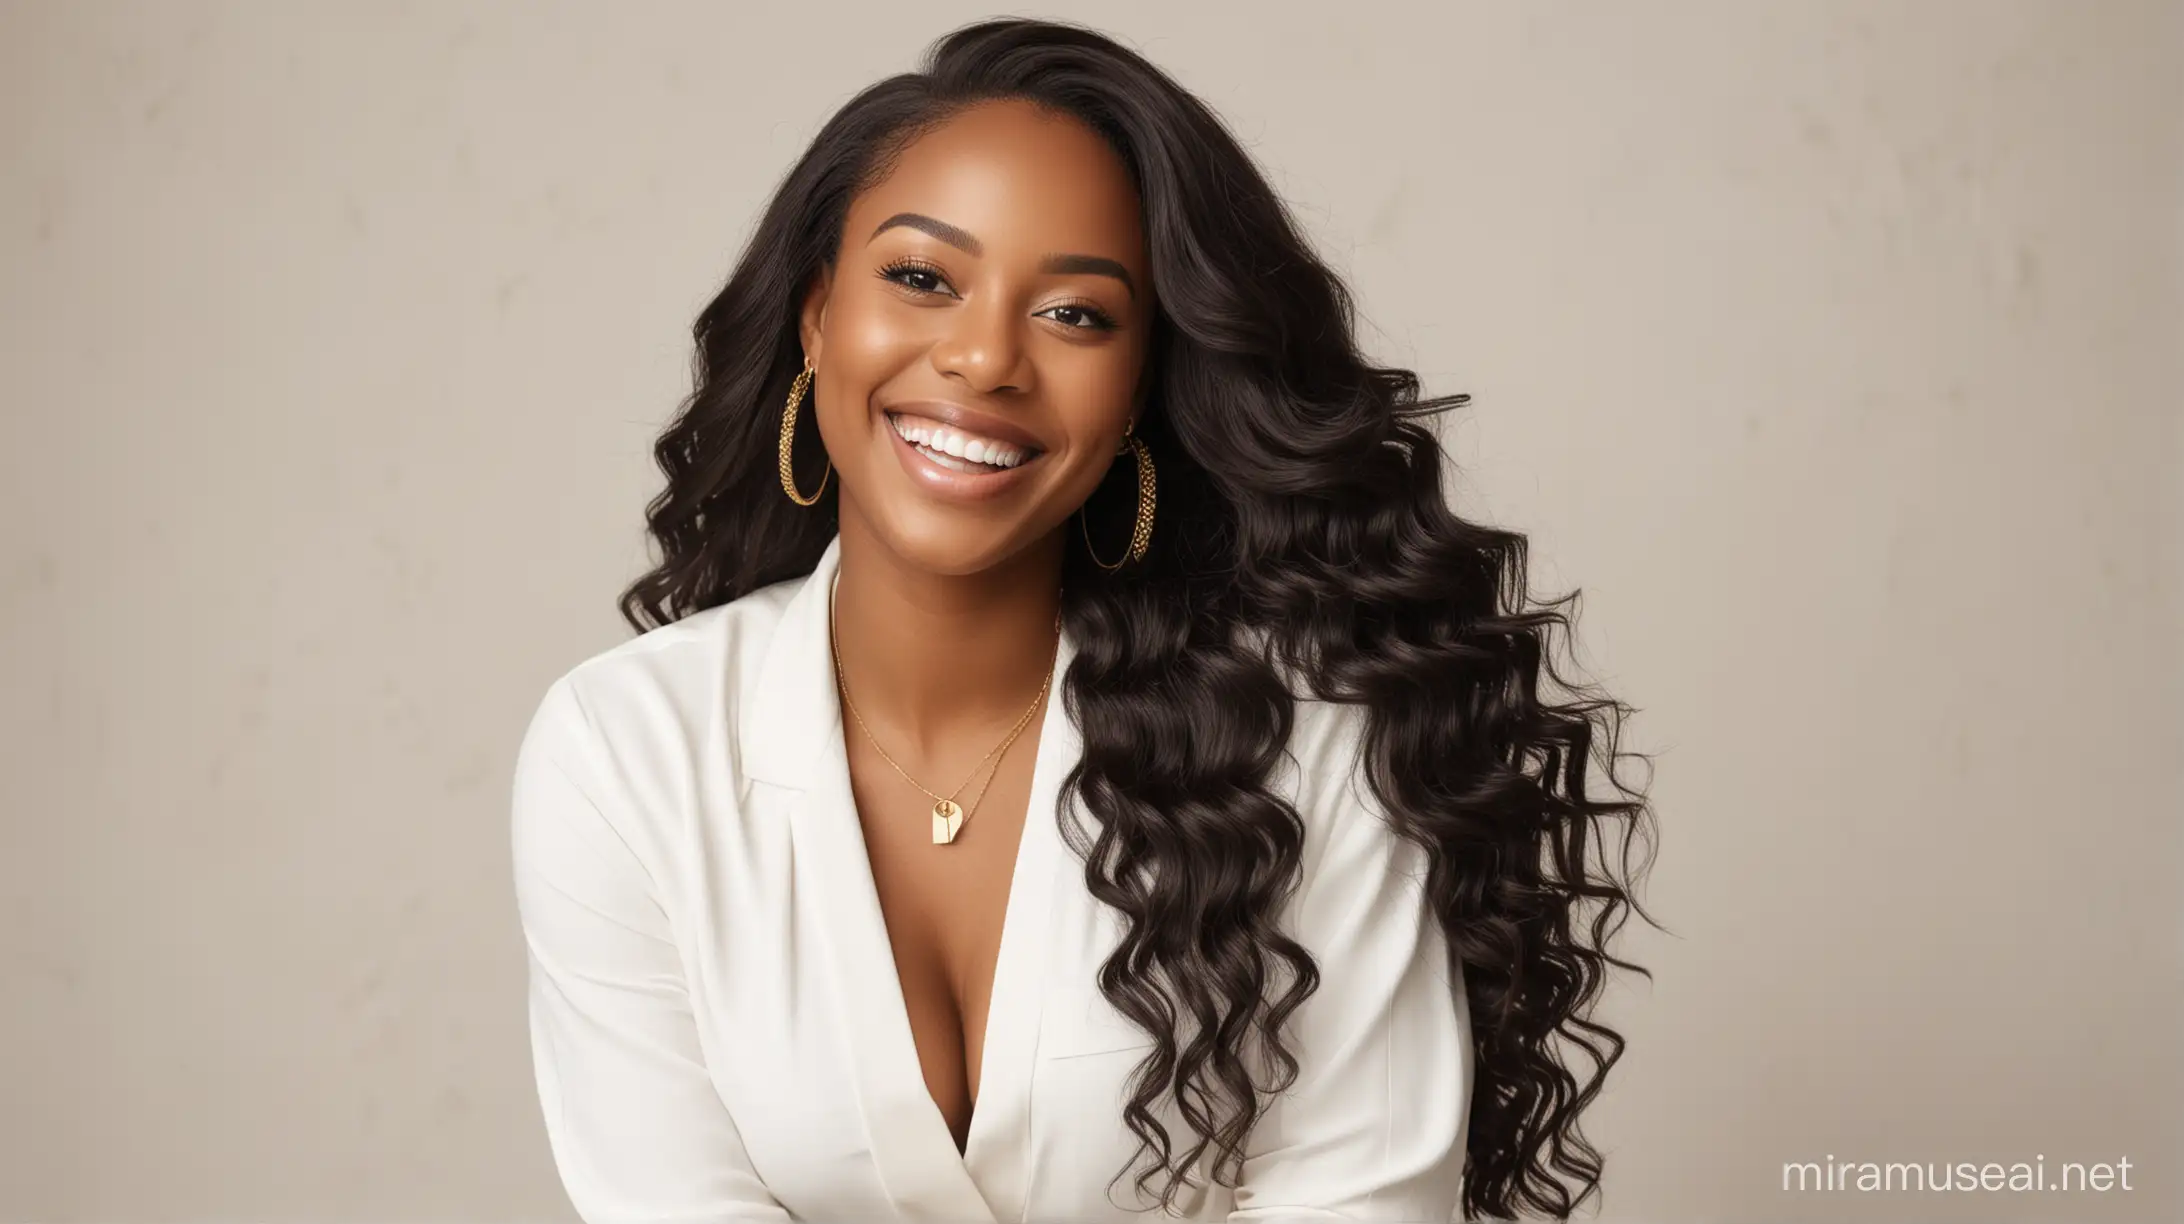 beautiful black woman entrepreneur with long weave branding photoshoot in clean  neutral realistic environment wearing white with gold accessaries smiling and laughing